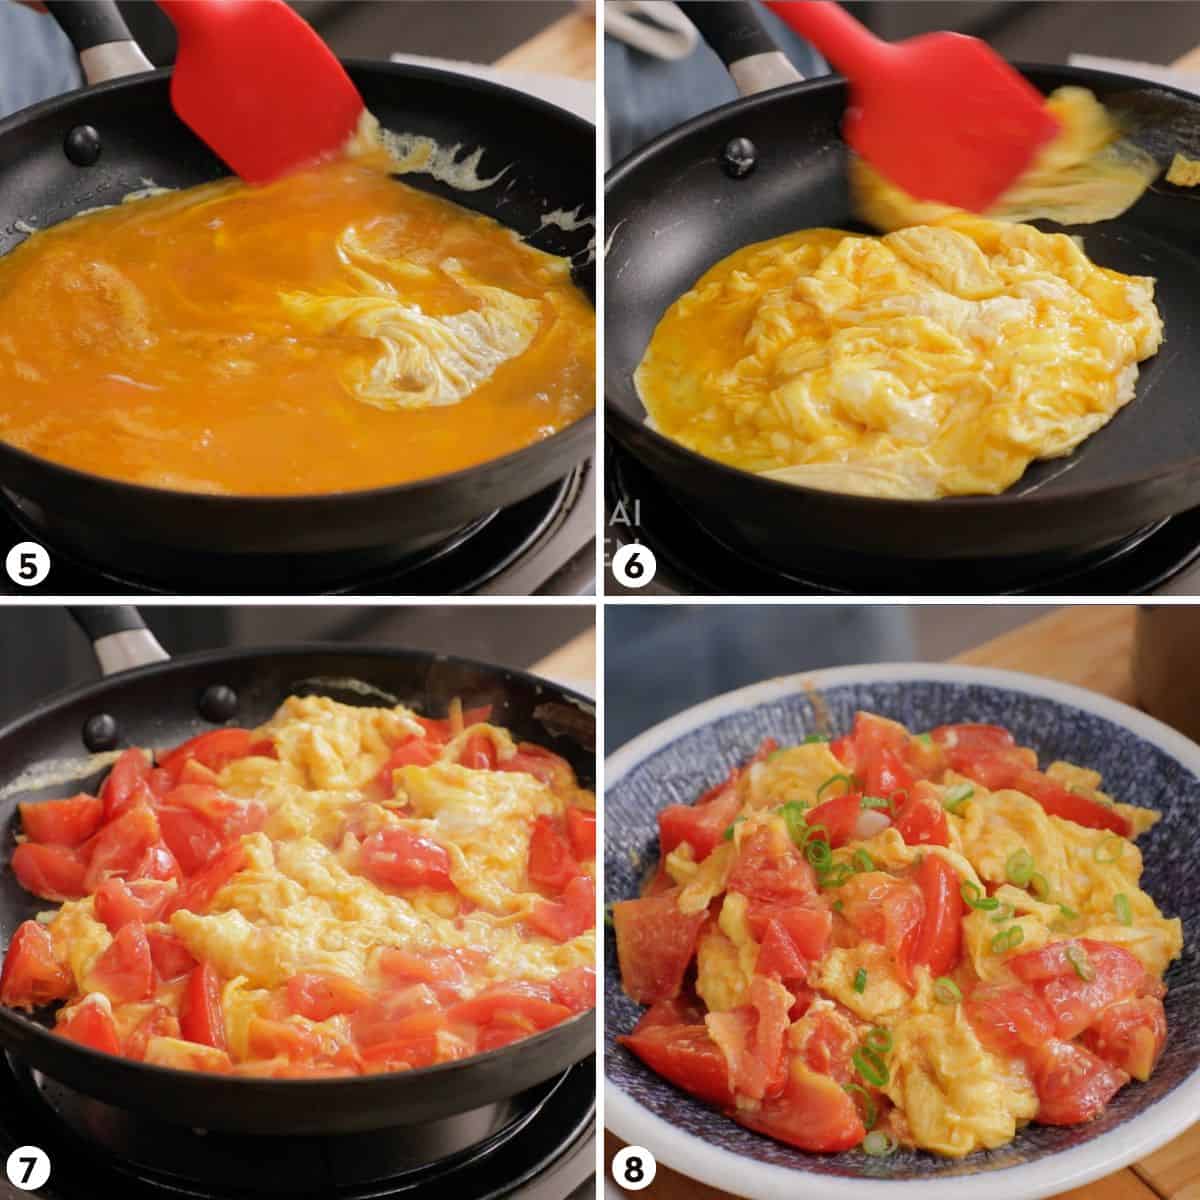 process shots for how to make tomato and egg stir fry, steps 5-8